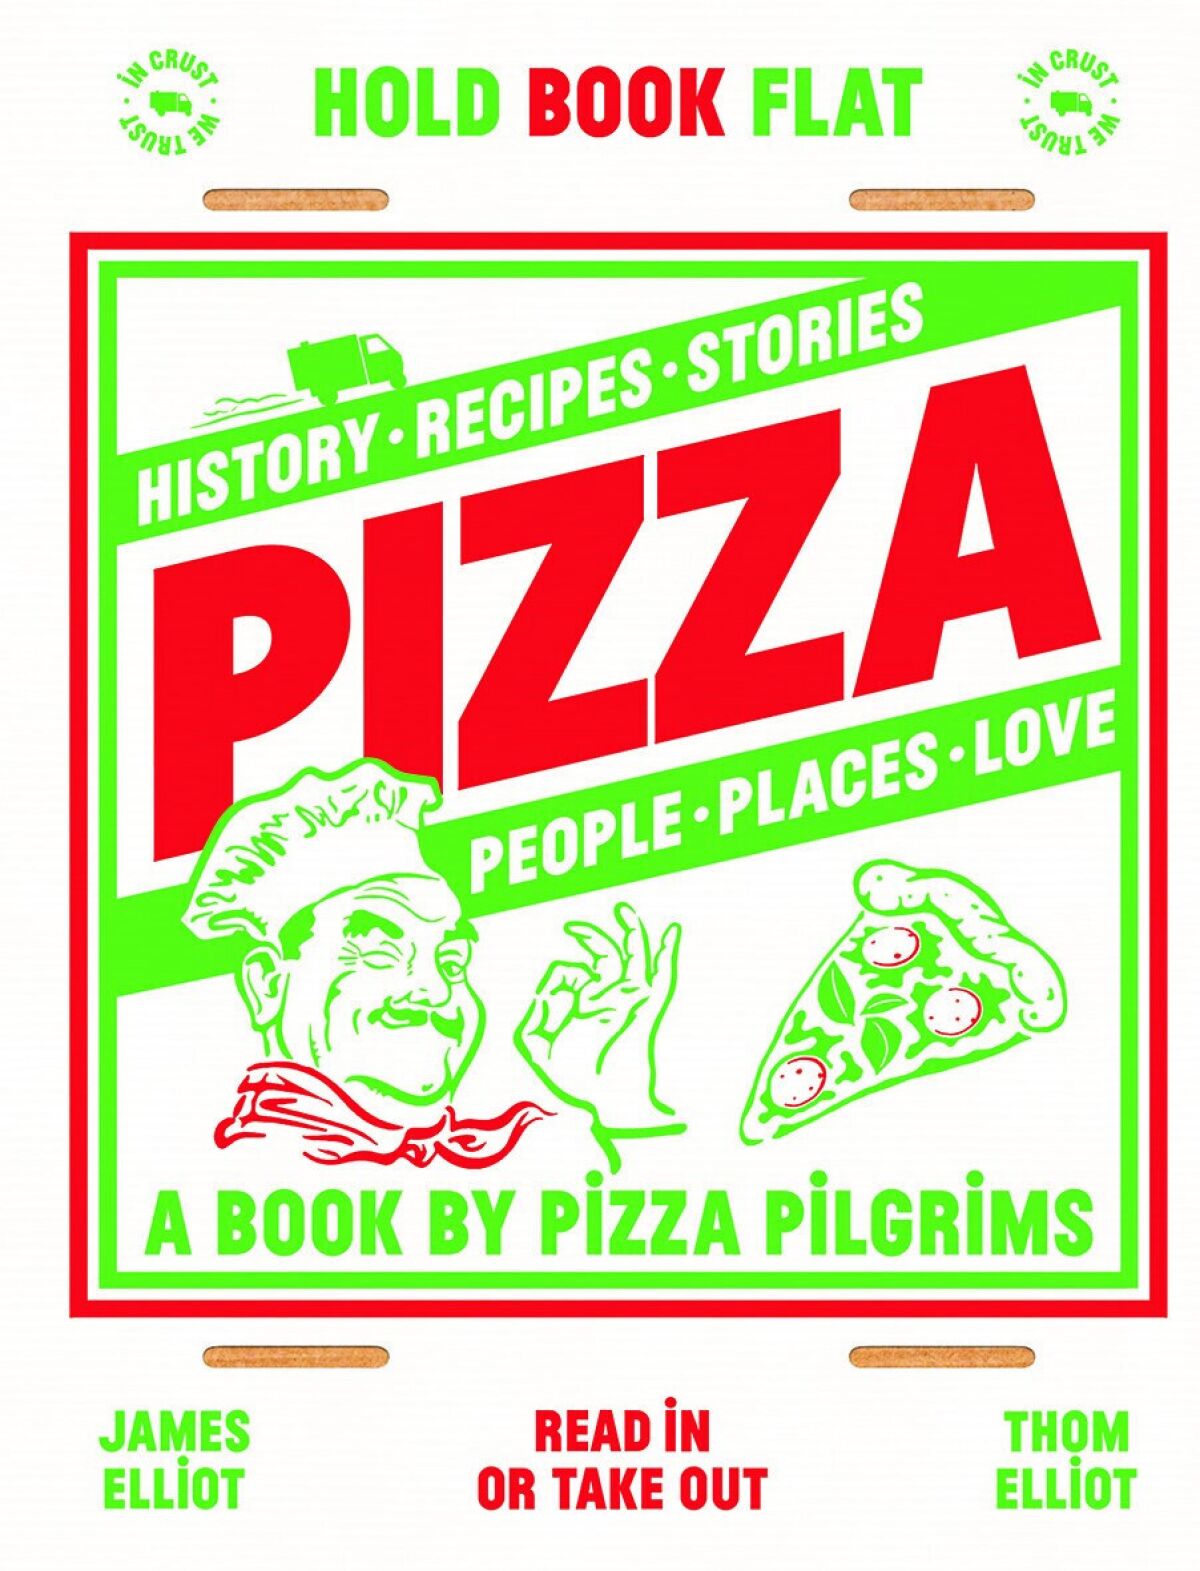 This cover image released by Quadrille shows "Pizza: History, recipes, stories, people, places, love" by Thom Elliot and James Elliot. (Quadrille via AP)